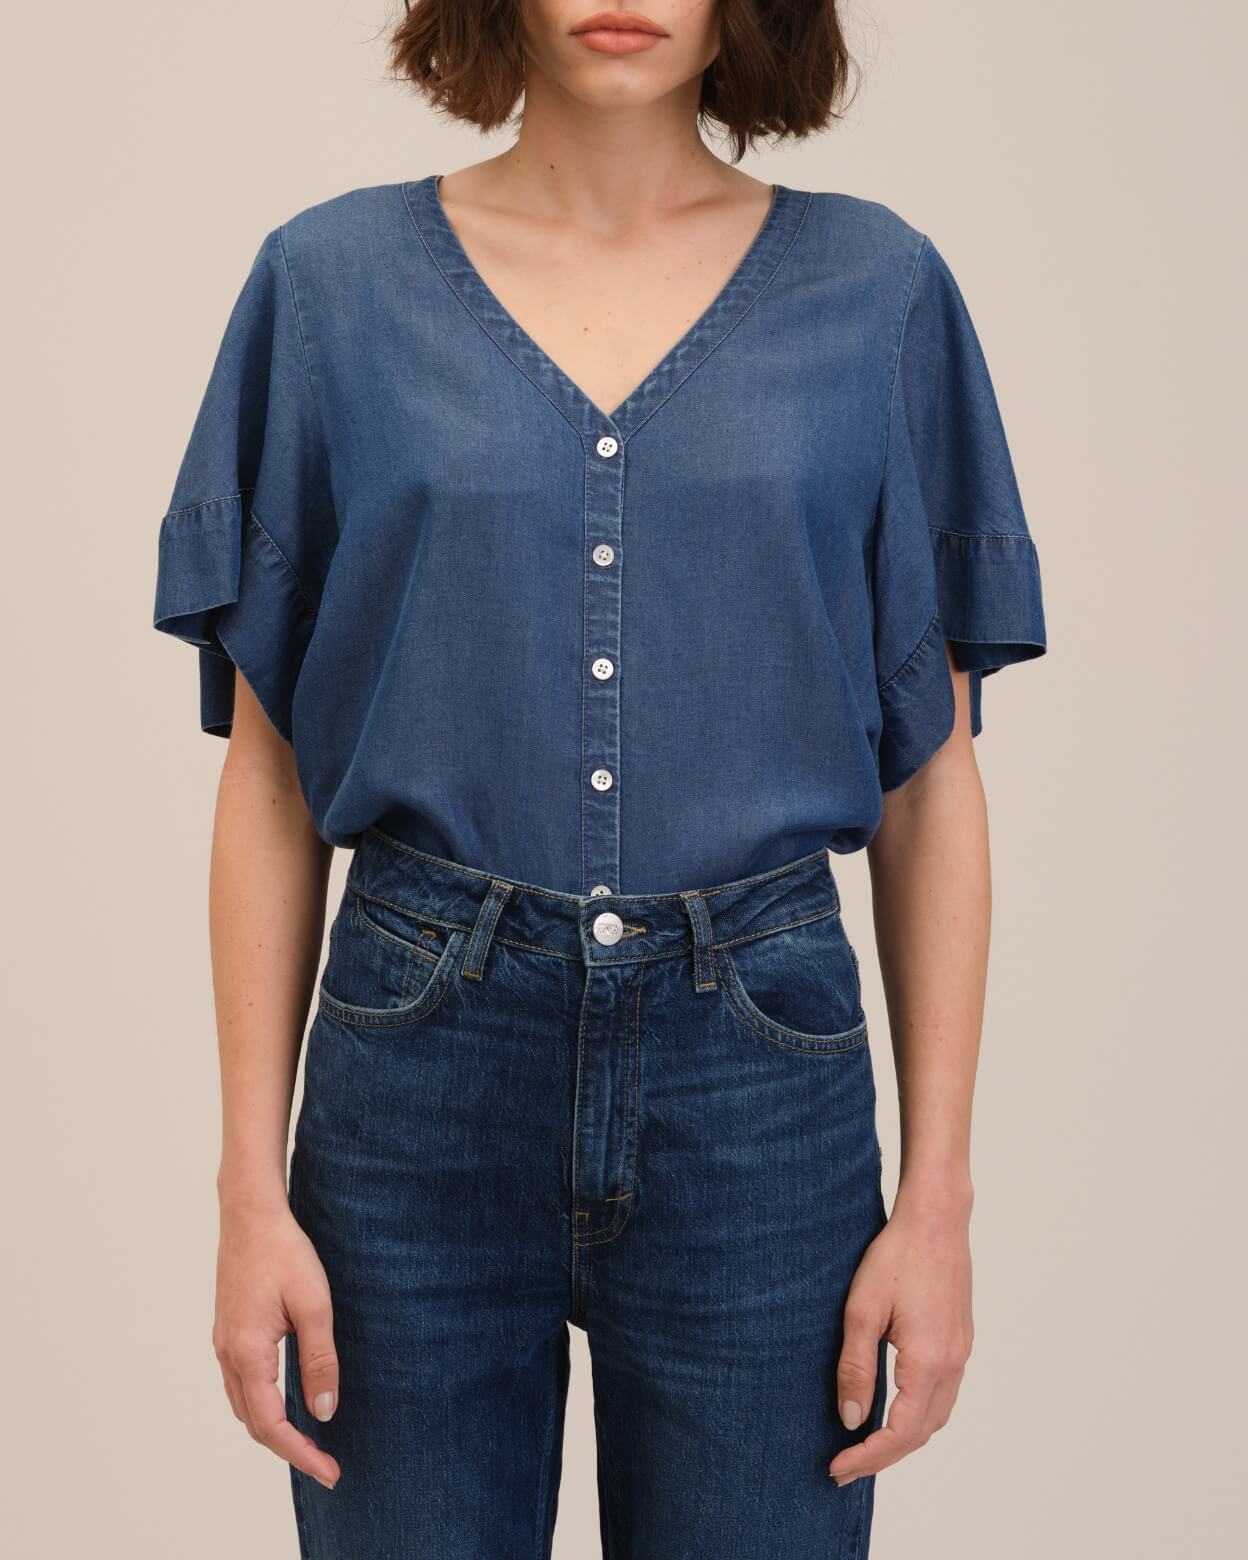 Flutter Sleeve Button Front Top | Chelsea & Theodore | JANE + MERCER